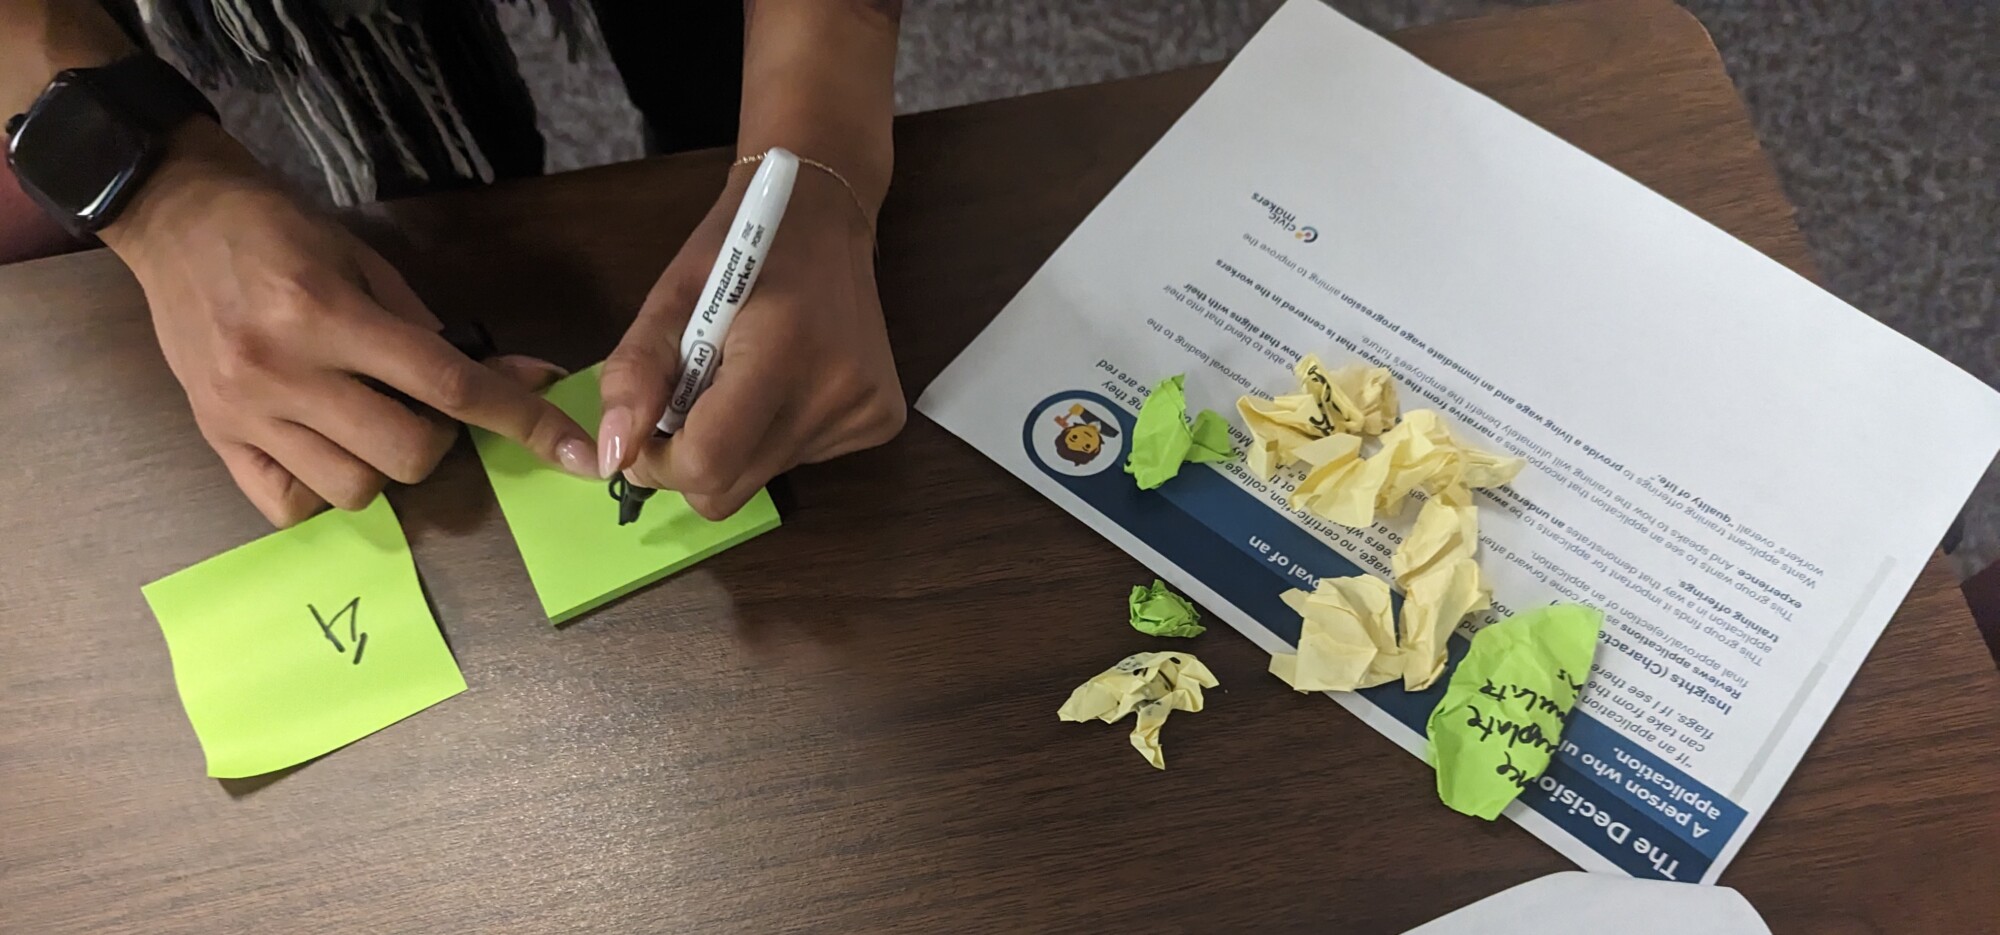 A session attendee's hands can be seen writing on a post-it. They have an open packet of background info in front of them, as well as a few crumpled up post-its.